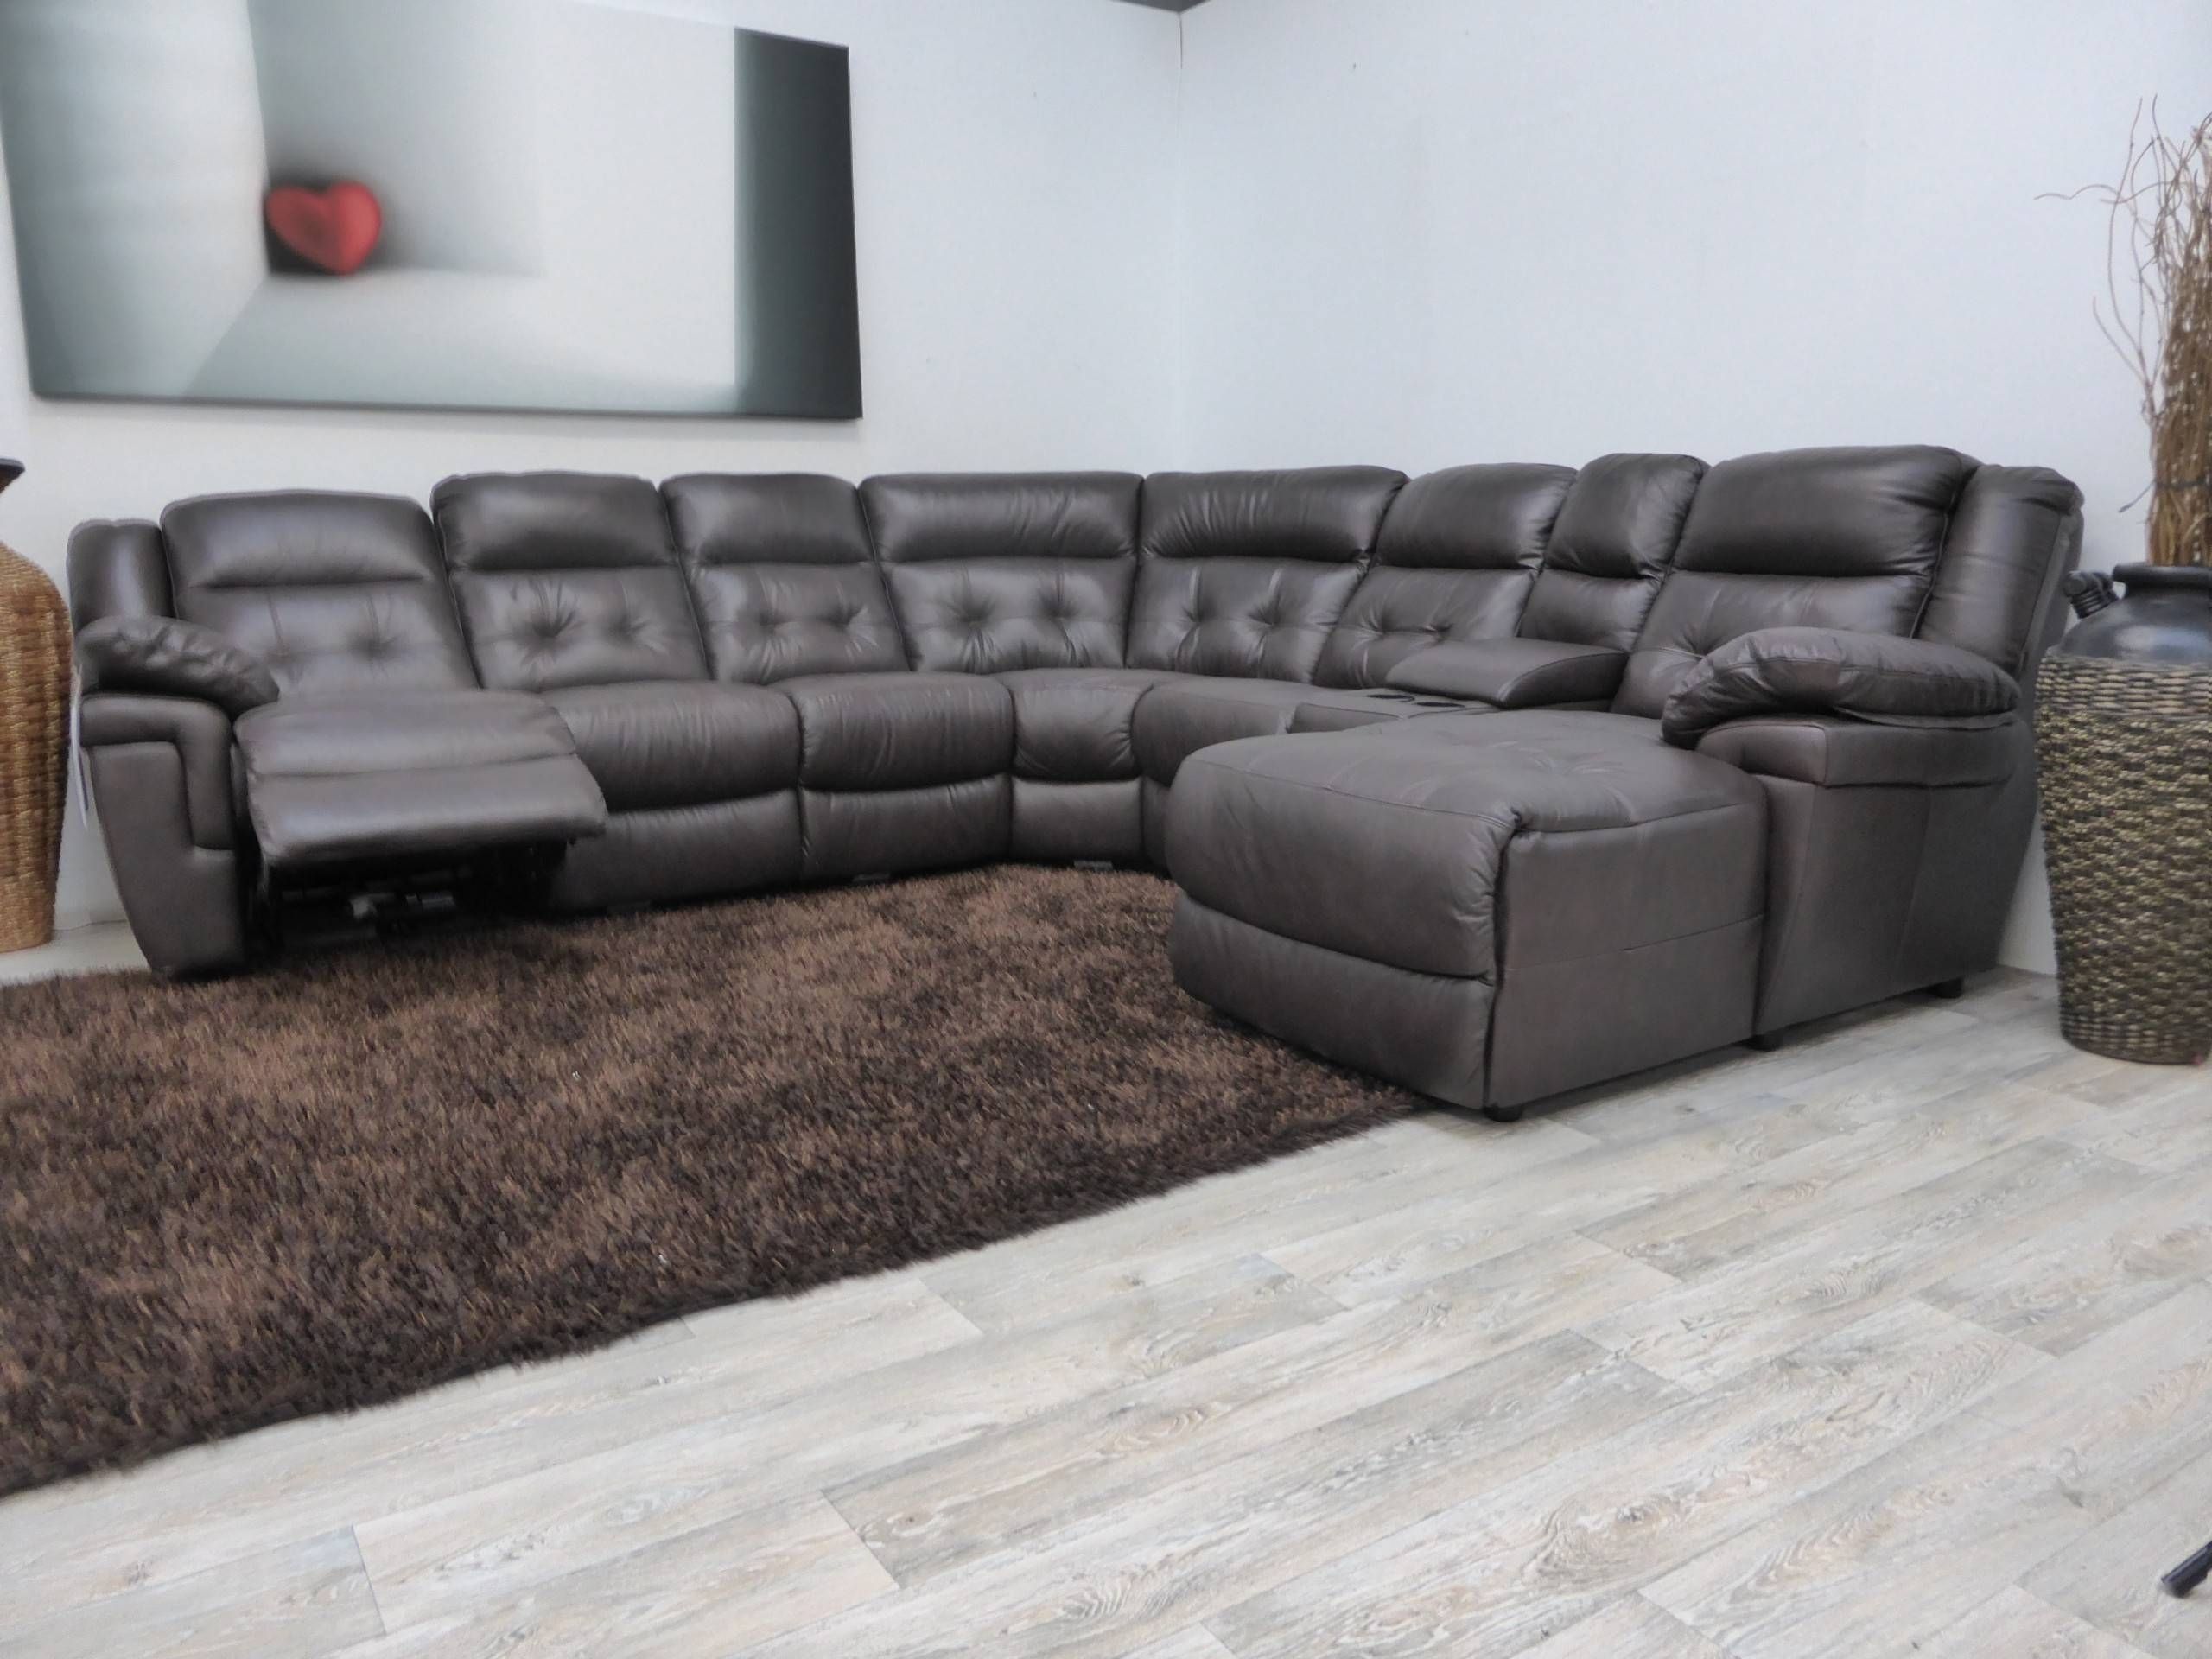 Sectional Sofas Craigslist – Cleanupflorida For 45 Degree Sectional Sofa (View 27 of 30)